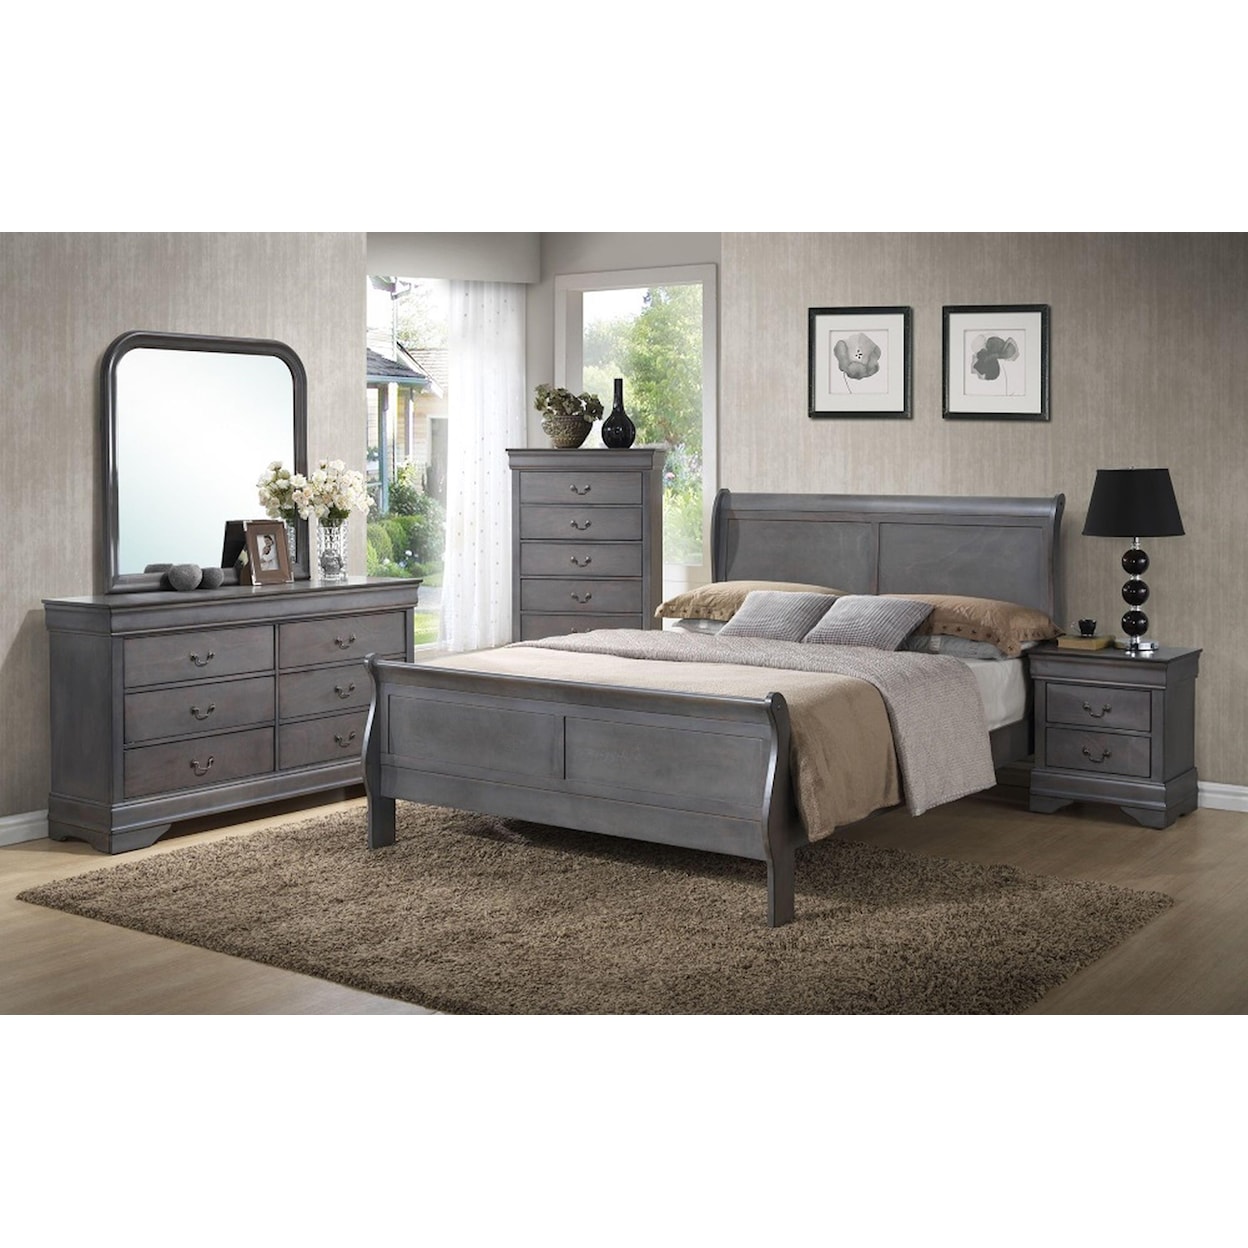 Lifestyle 5934 5 Piece Full Bedroom Set with Chest